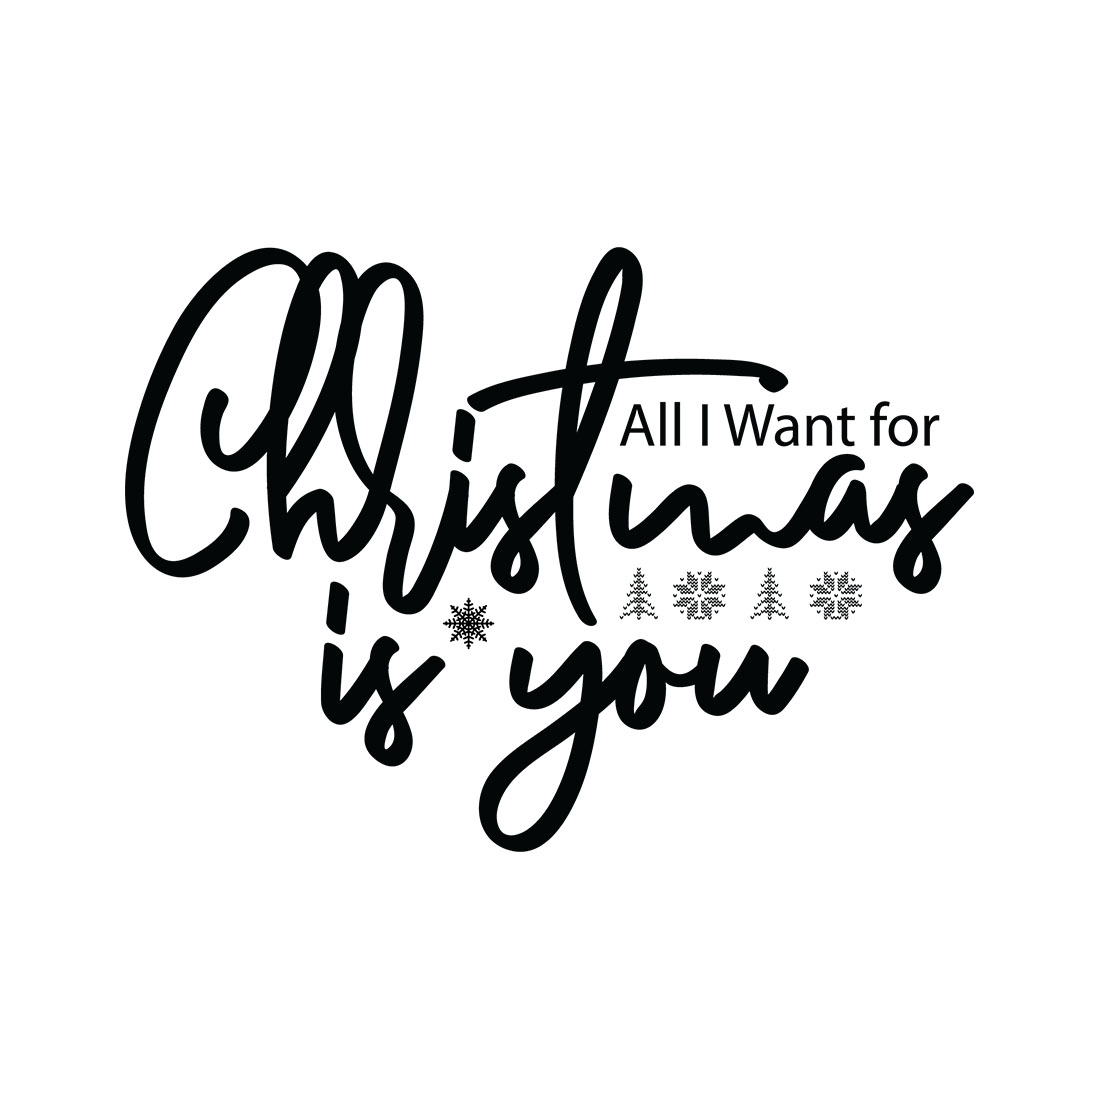 An image with an irresistible black inscription for prints All I Want For Christmas Is You.